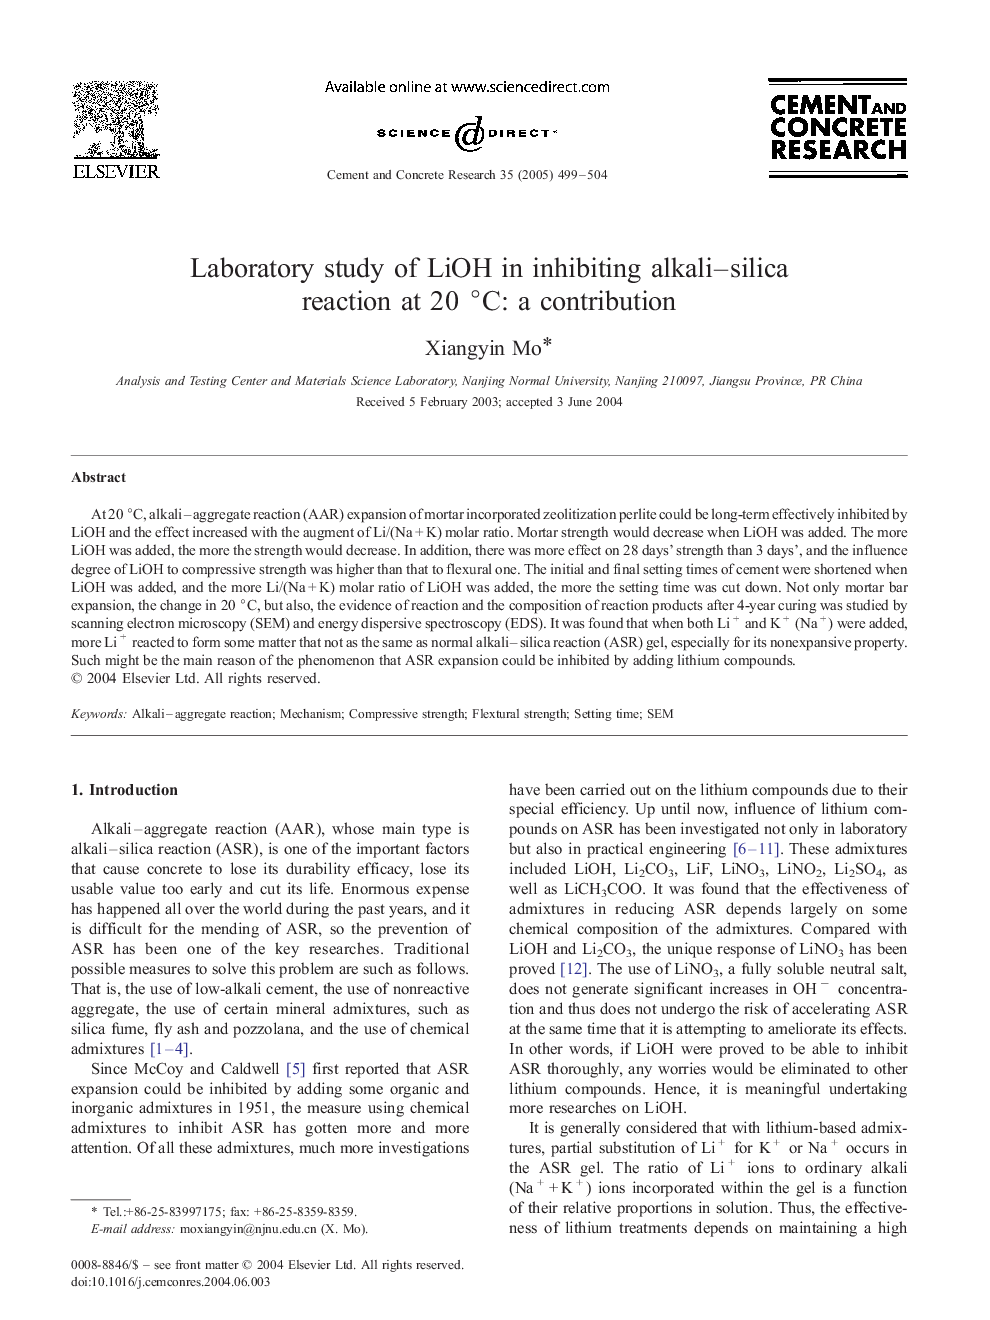 Laboratory study of LiOH in inhibiting alkali-silica reaction at 20 Â°C: a contribution